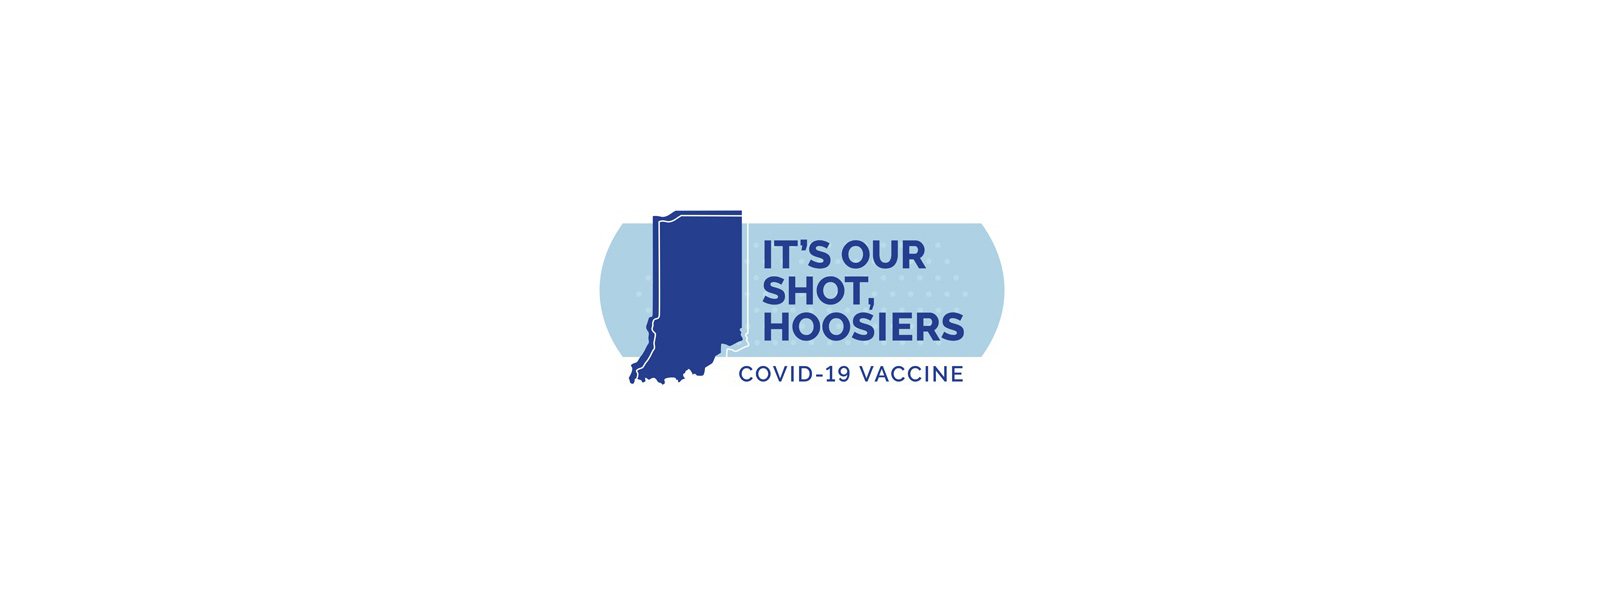 Thumbnail for the post titled: Parents can now schedule COVID-19 vaccine appointments for children through age 5 at www.ourshot.in.gov